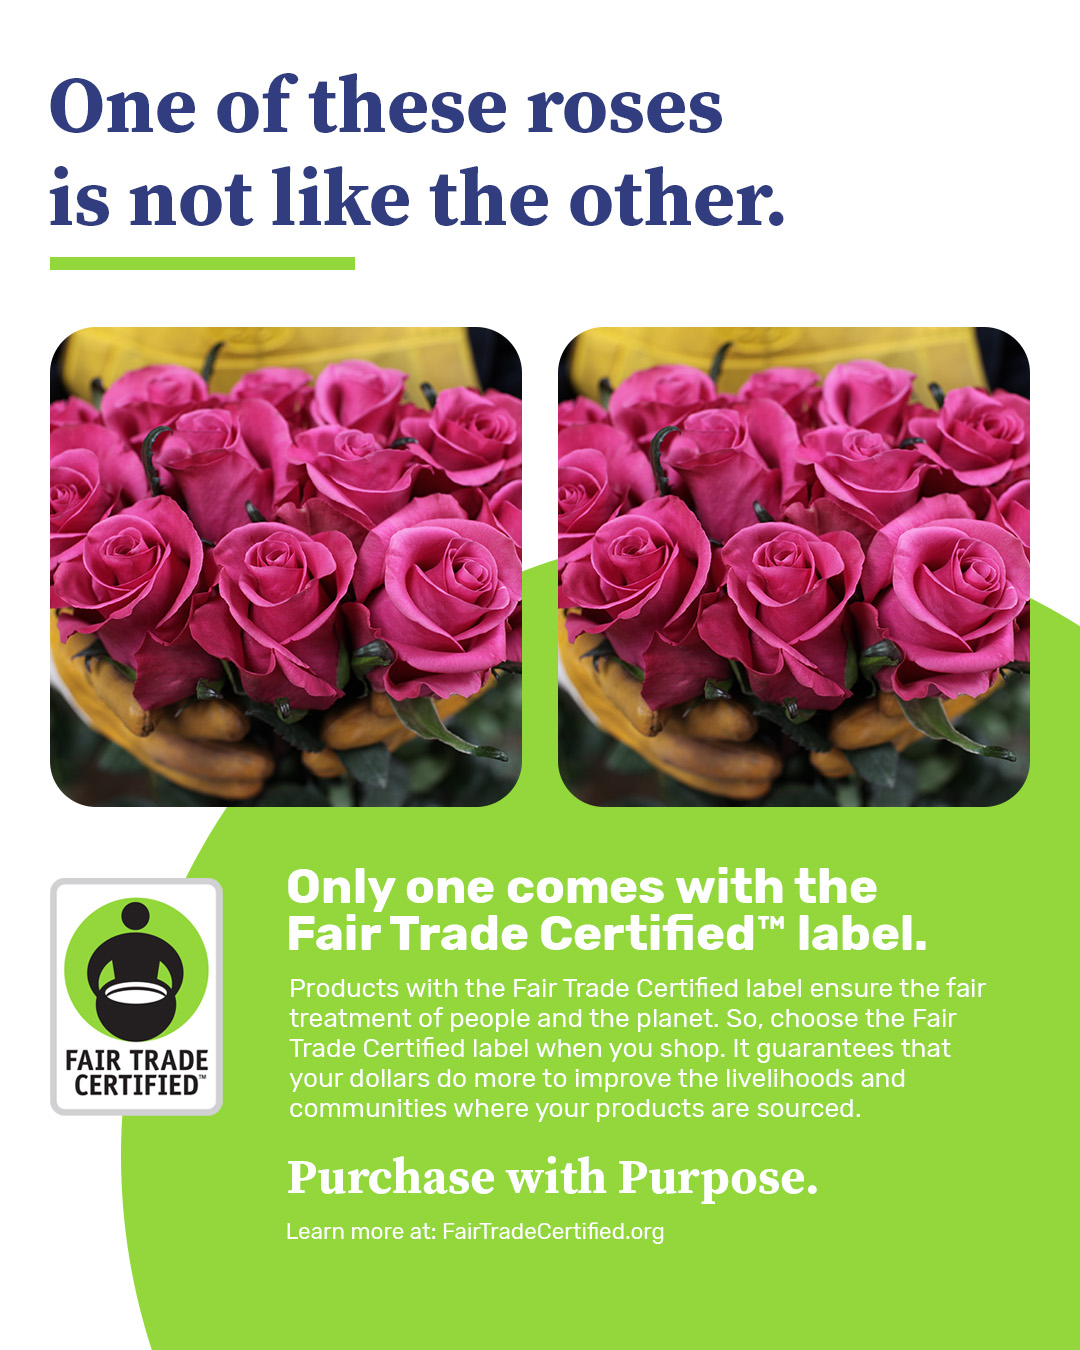 An ad from Fair Trade Certified's 'Purchase With Purpose' campaign that shows two identical photos of roses, but explains that one is not like the other because one features the Fair Trade Certified label.